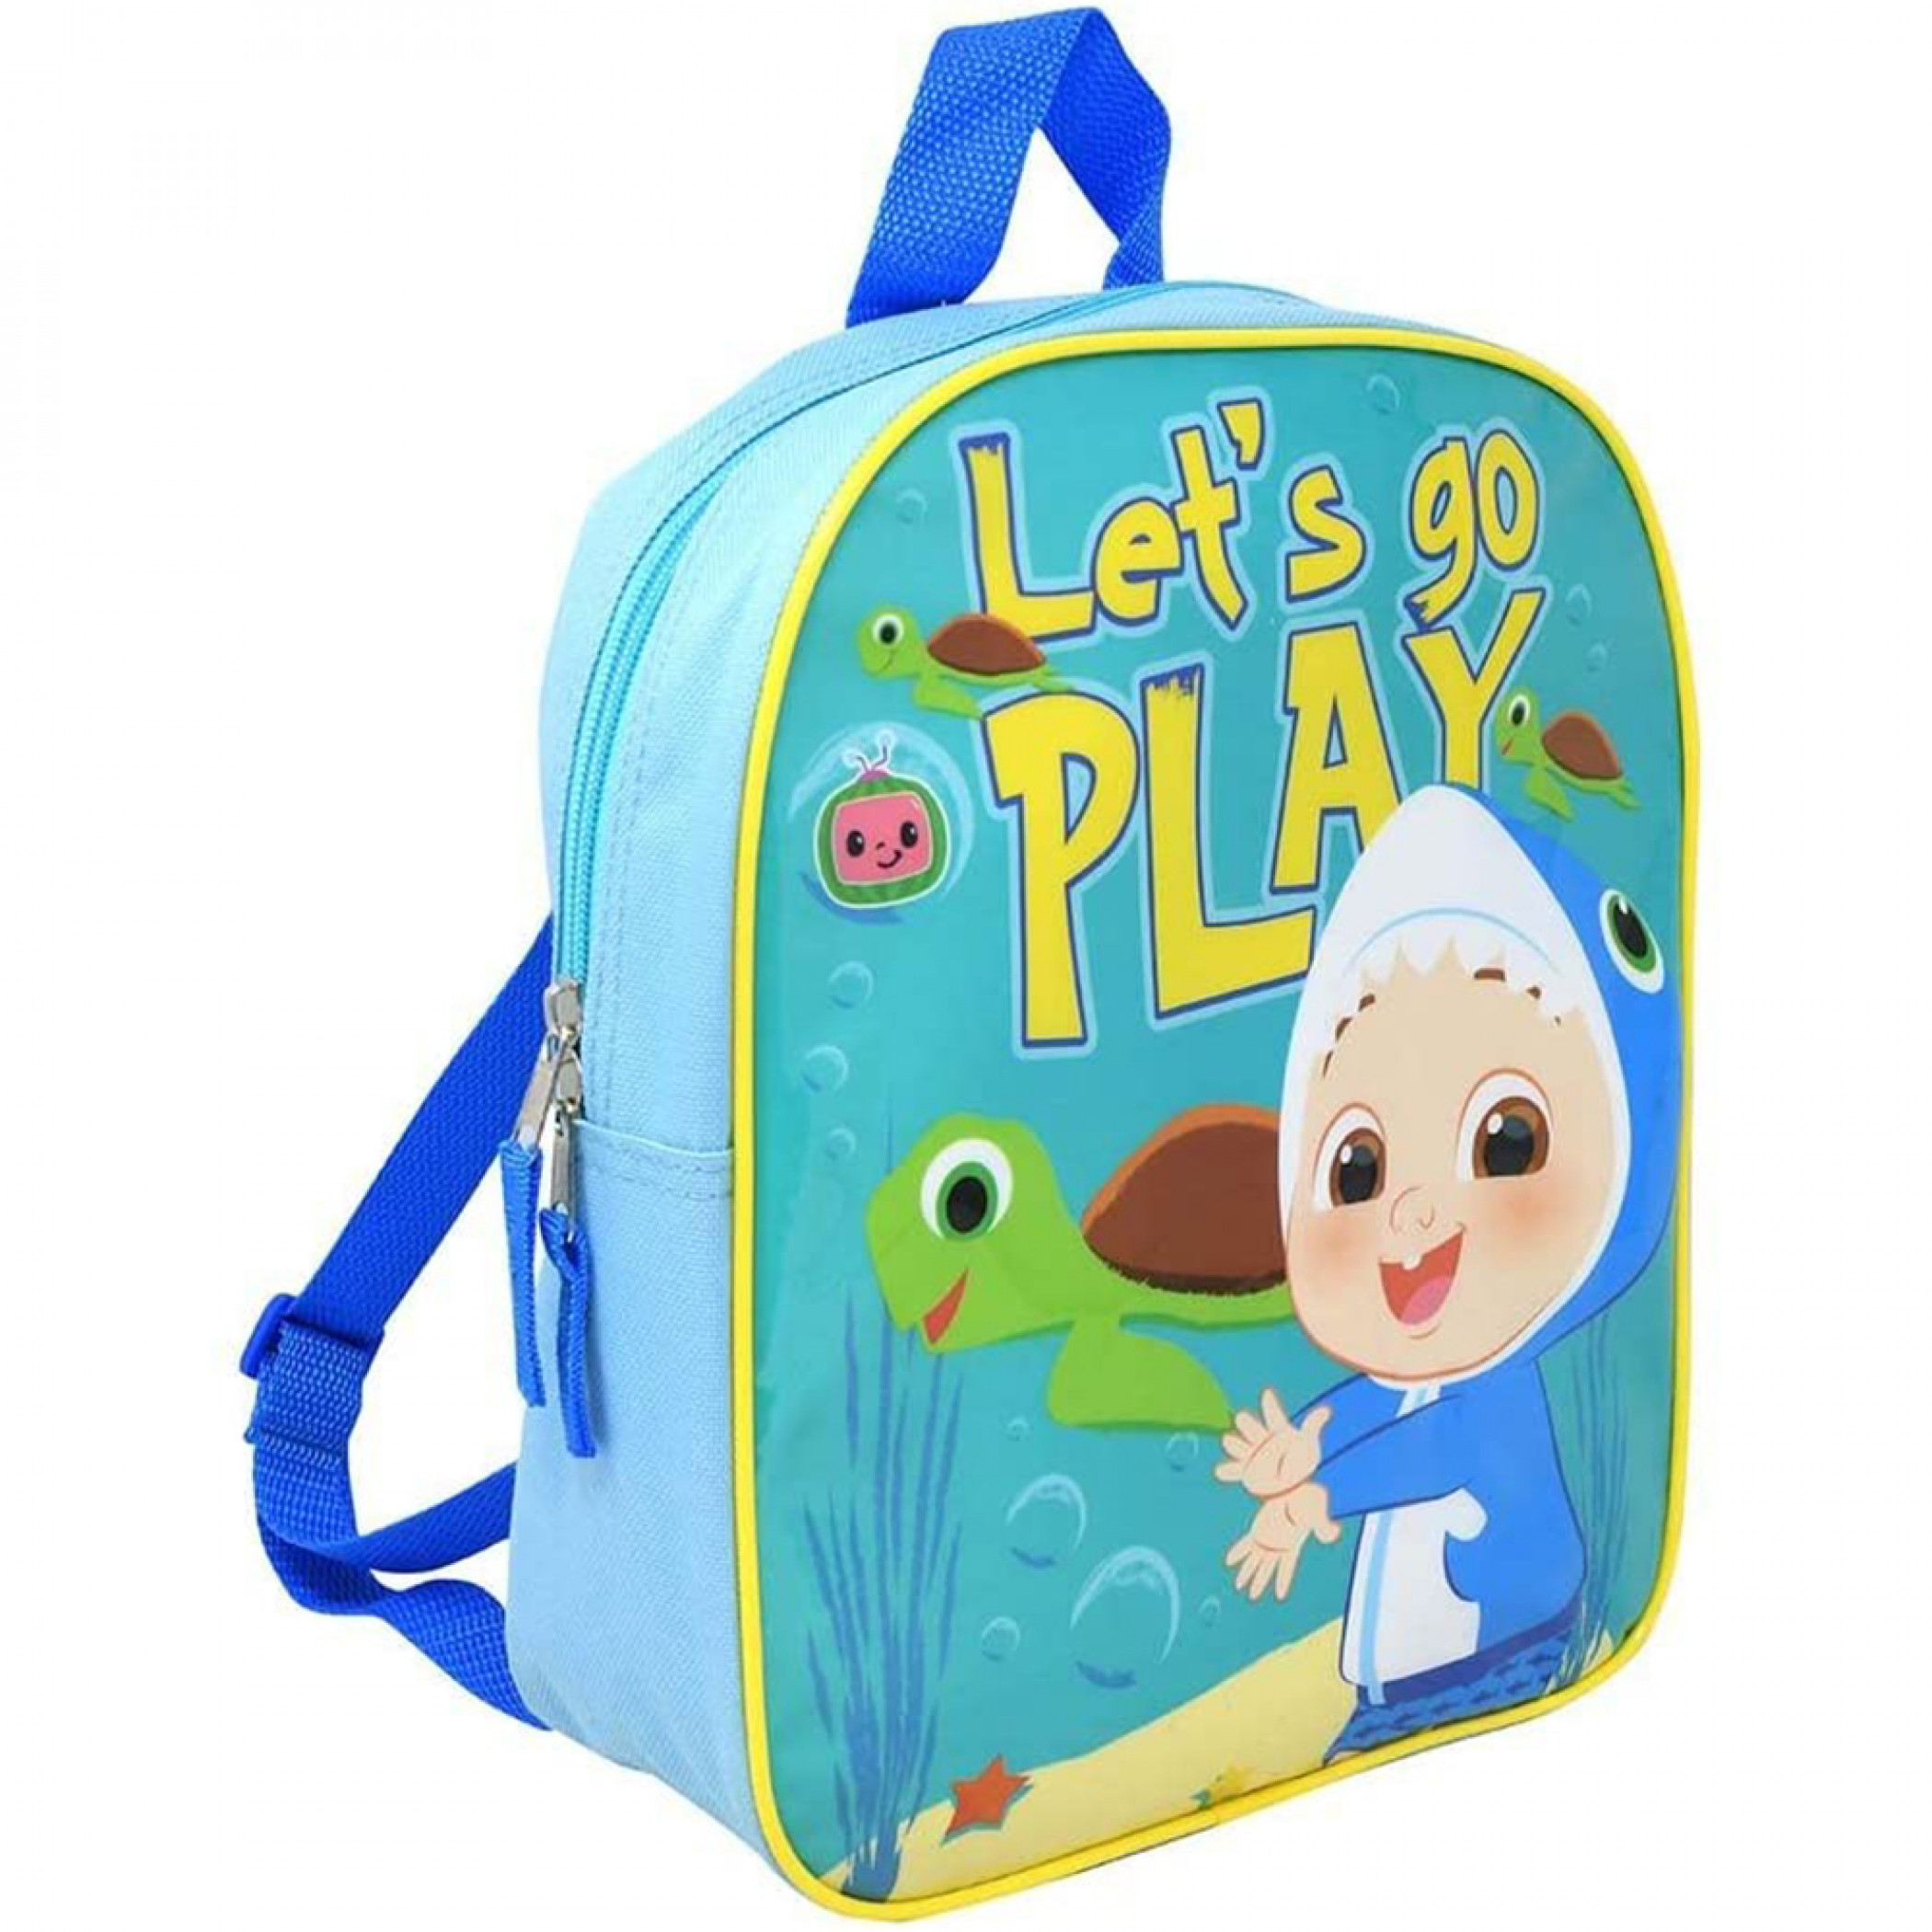 Cocomelon Baby Shark Let's Go Play 11" Mini Backpack